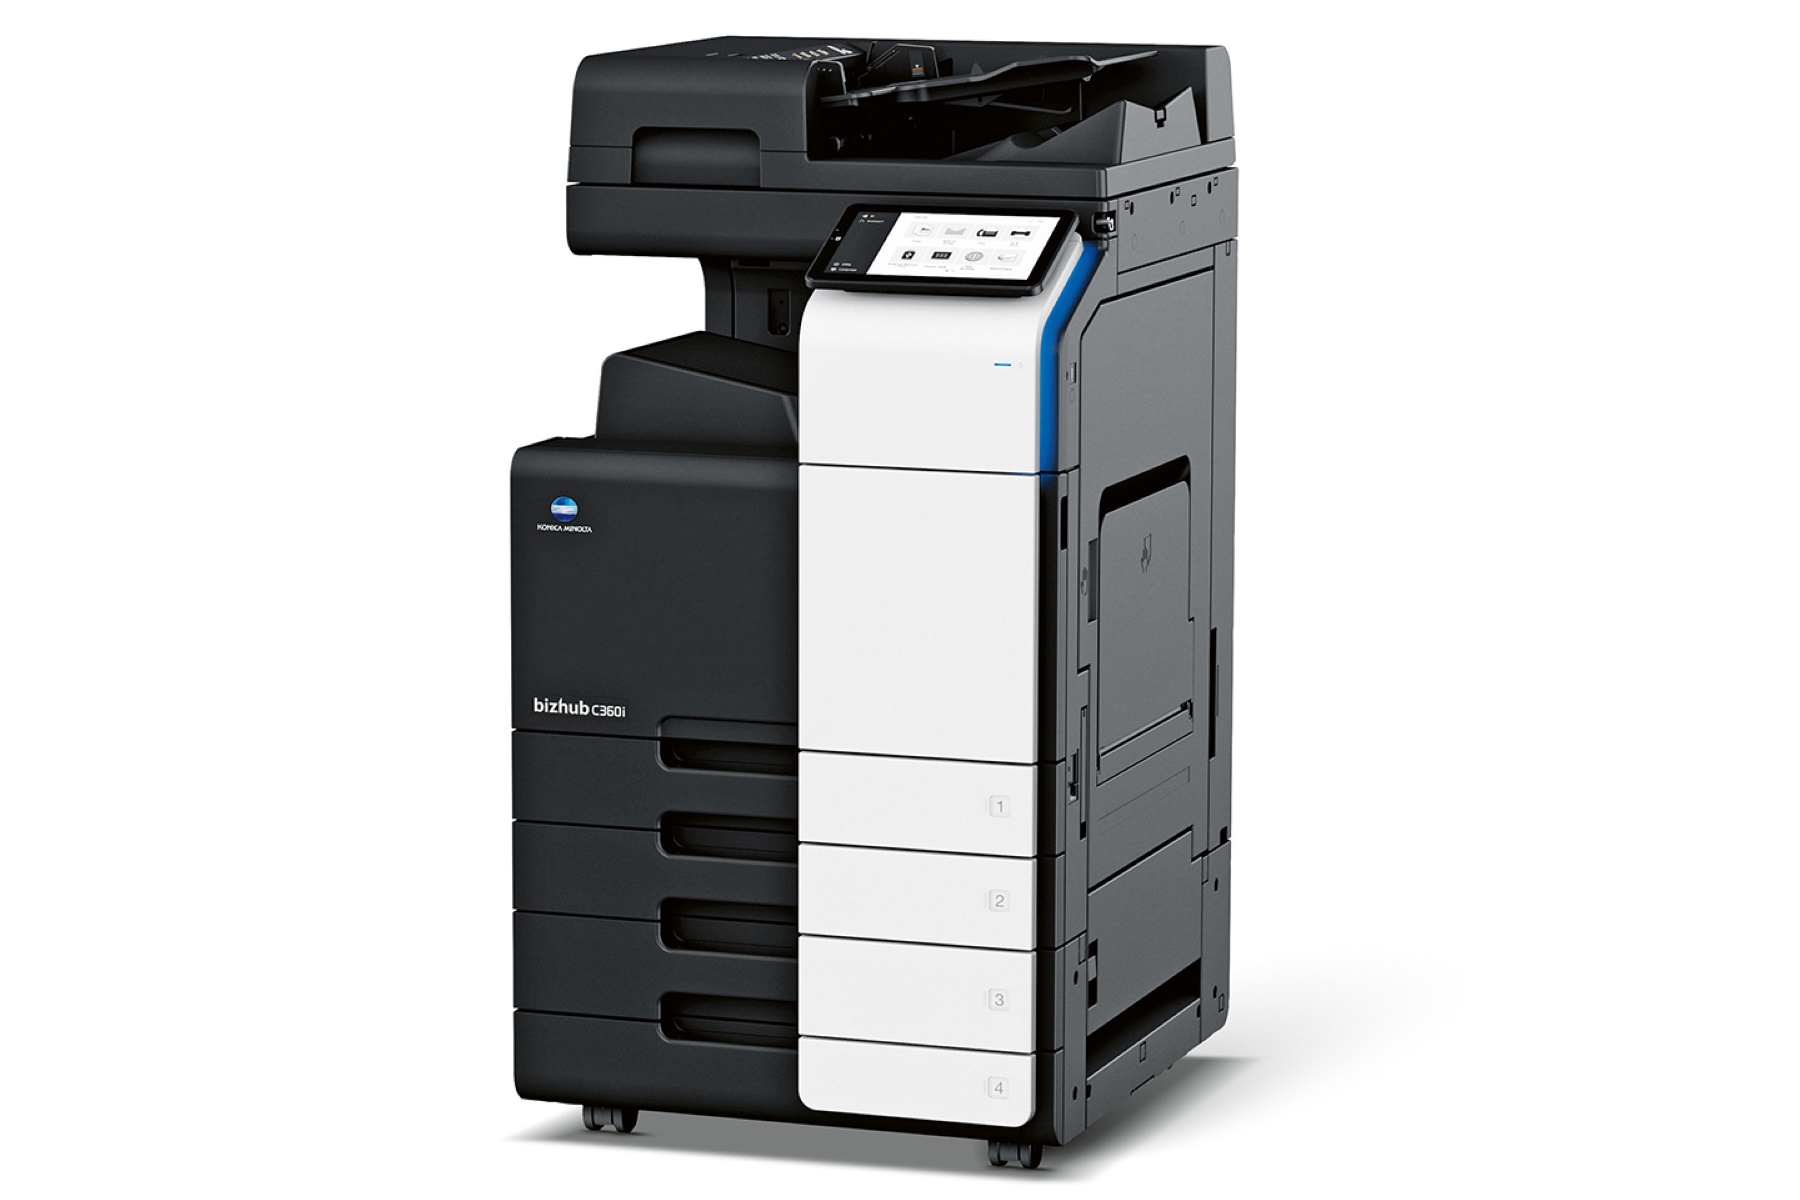 How To Connect Konica Minolta Printer To Computer